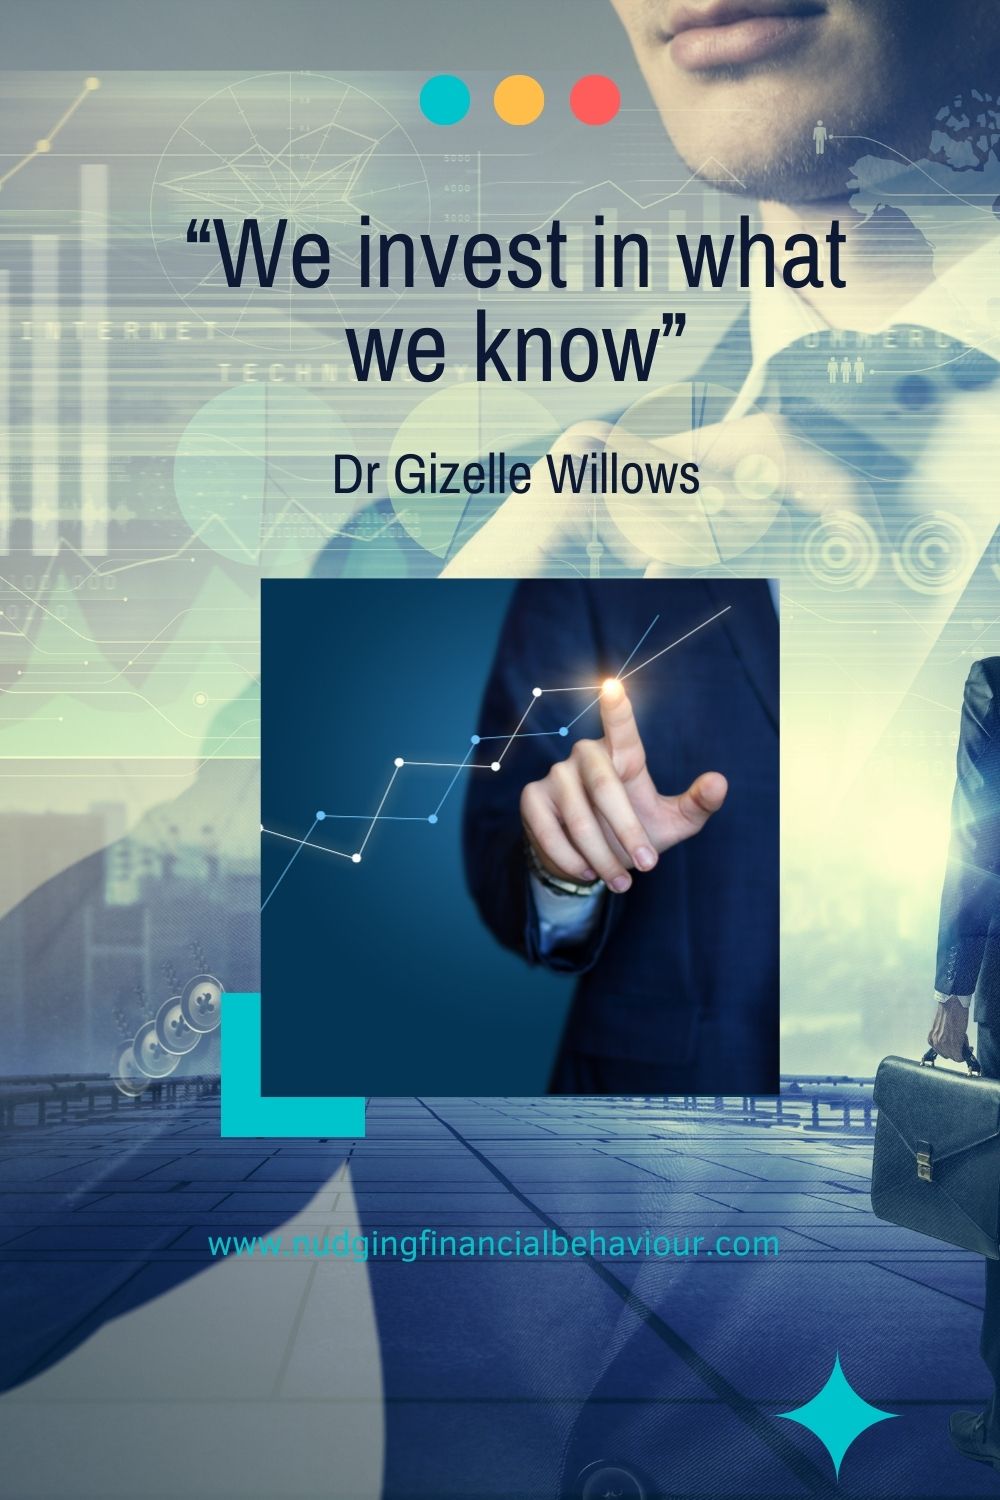 We invest in what we know